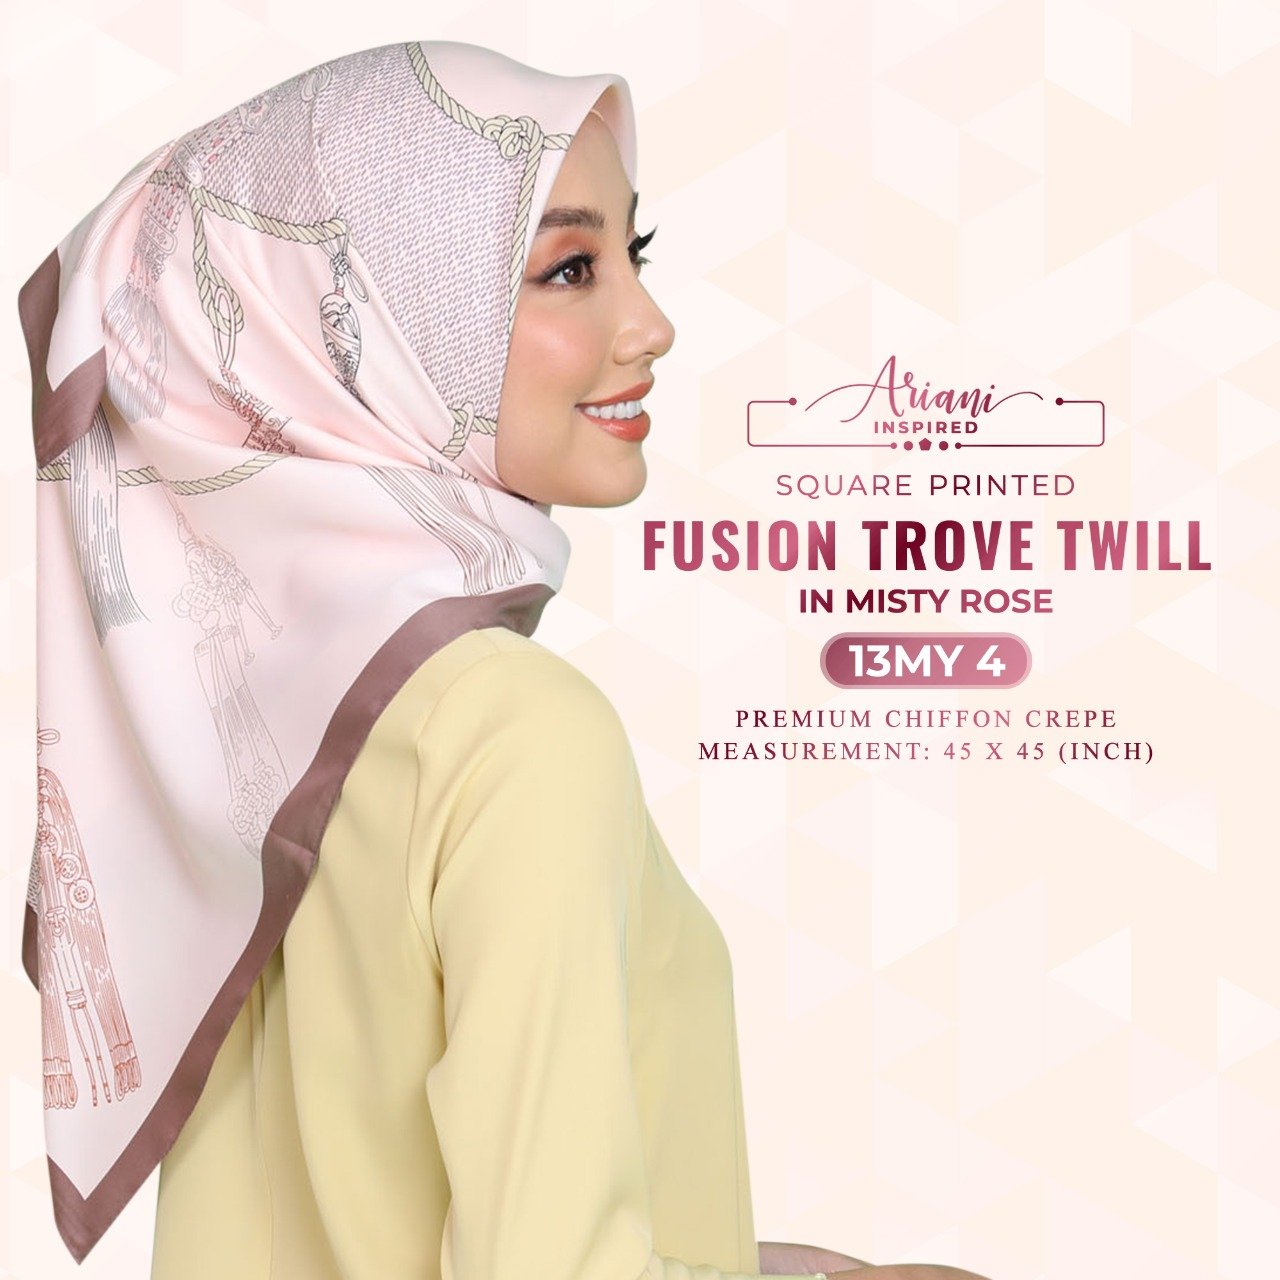 Ariani Inspired Fusion Trove Twill Printed SQ Collection